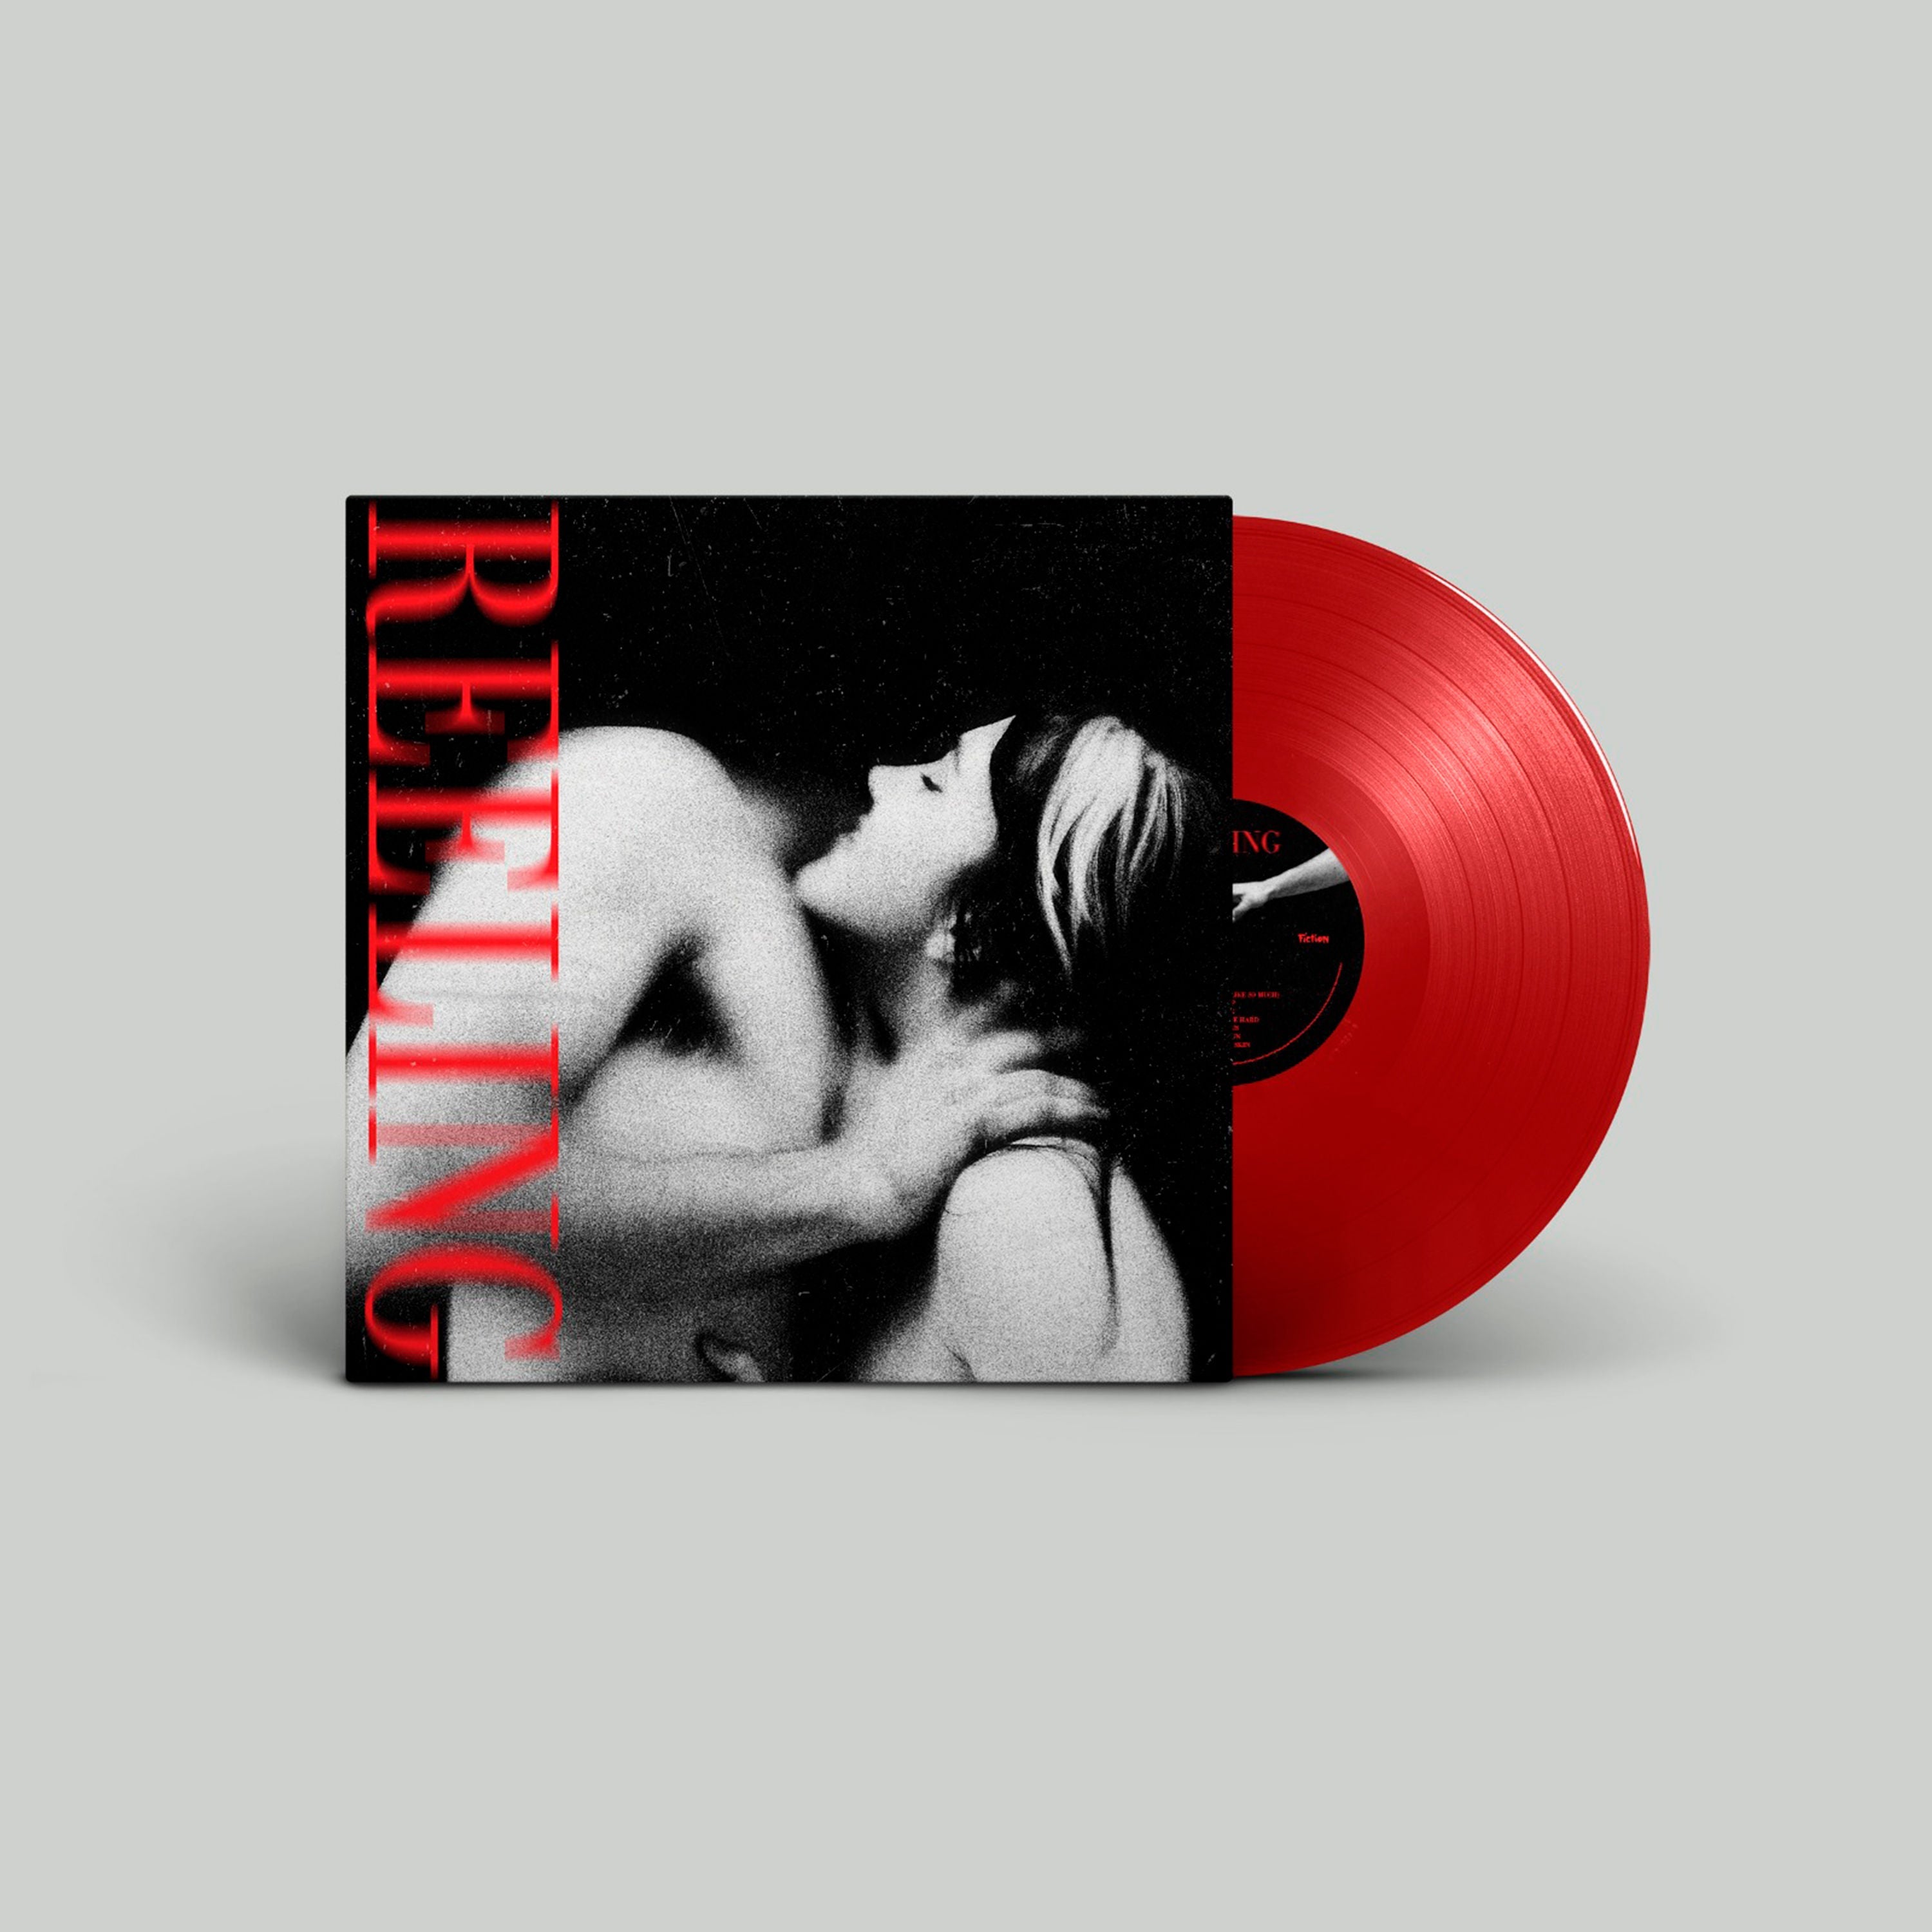 Reeling: Limited Edition Opaque Red Vinyl LP + Signed Artcard